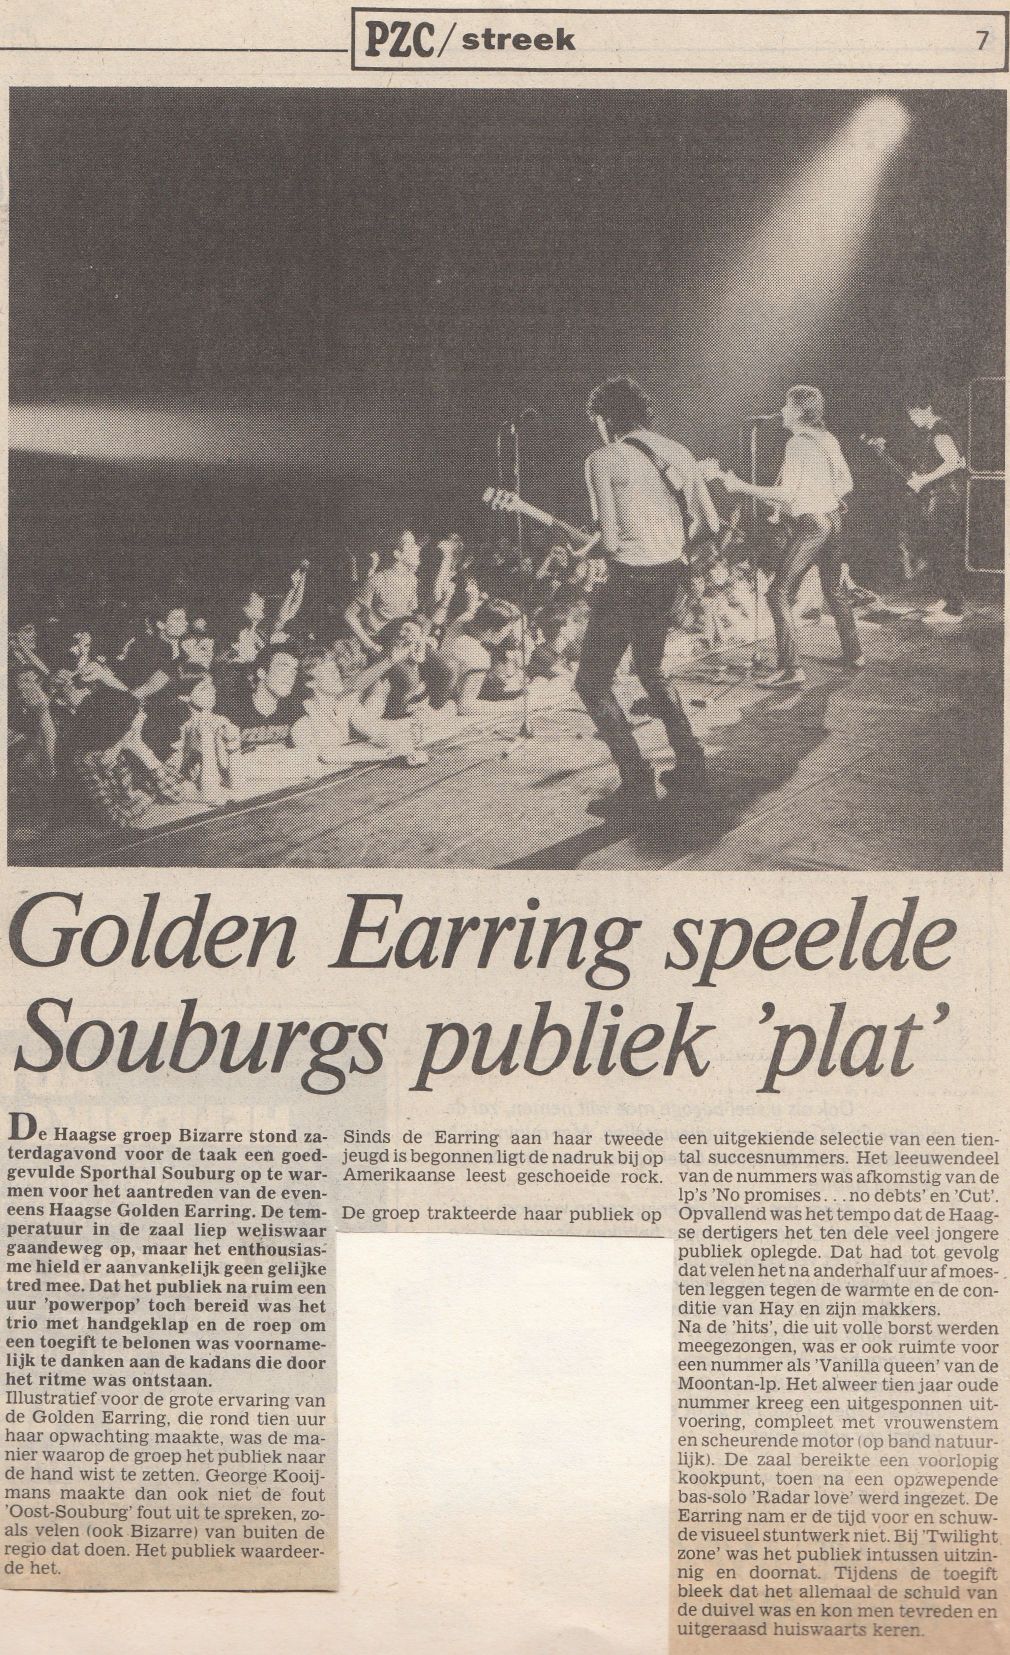 May 14 1983 Souburg show review PZC newspaper, picture thanks to Berry Albers